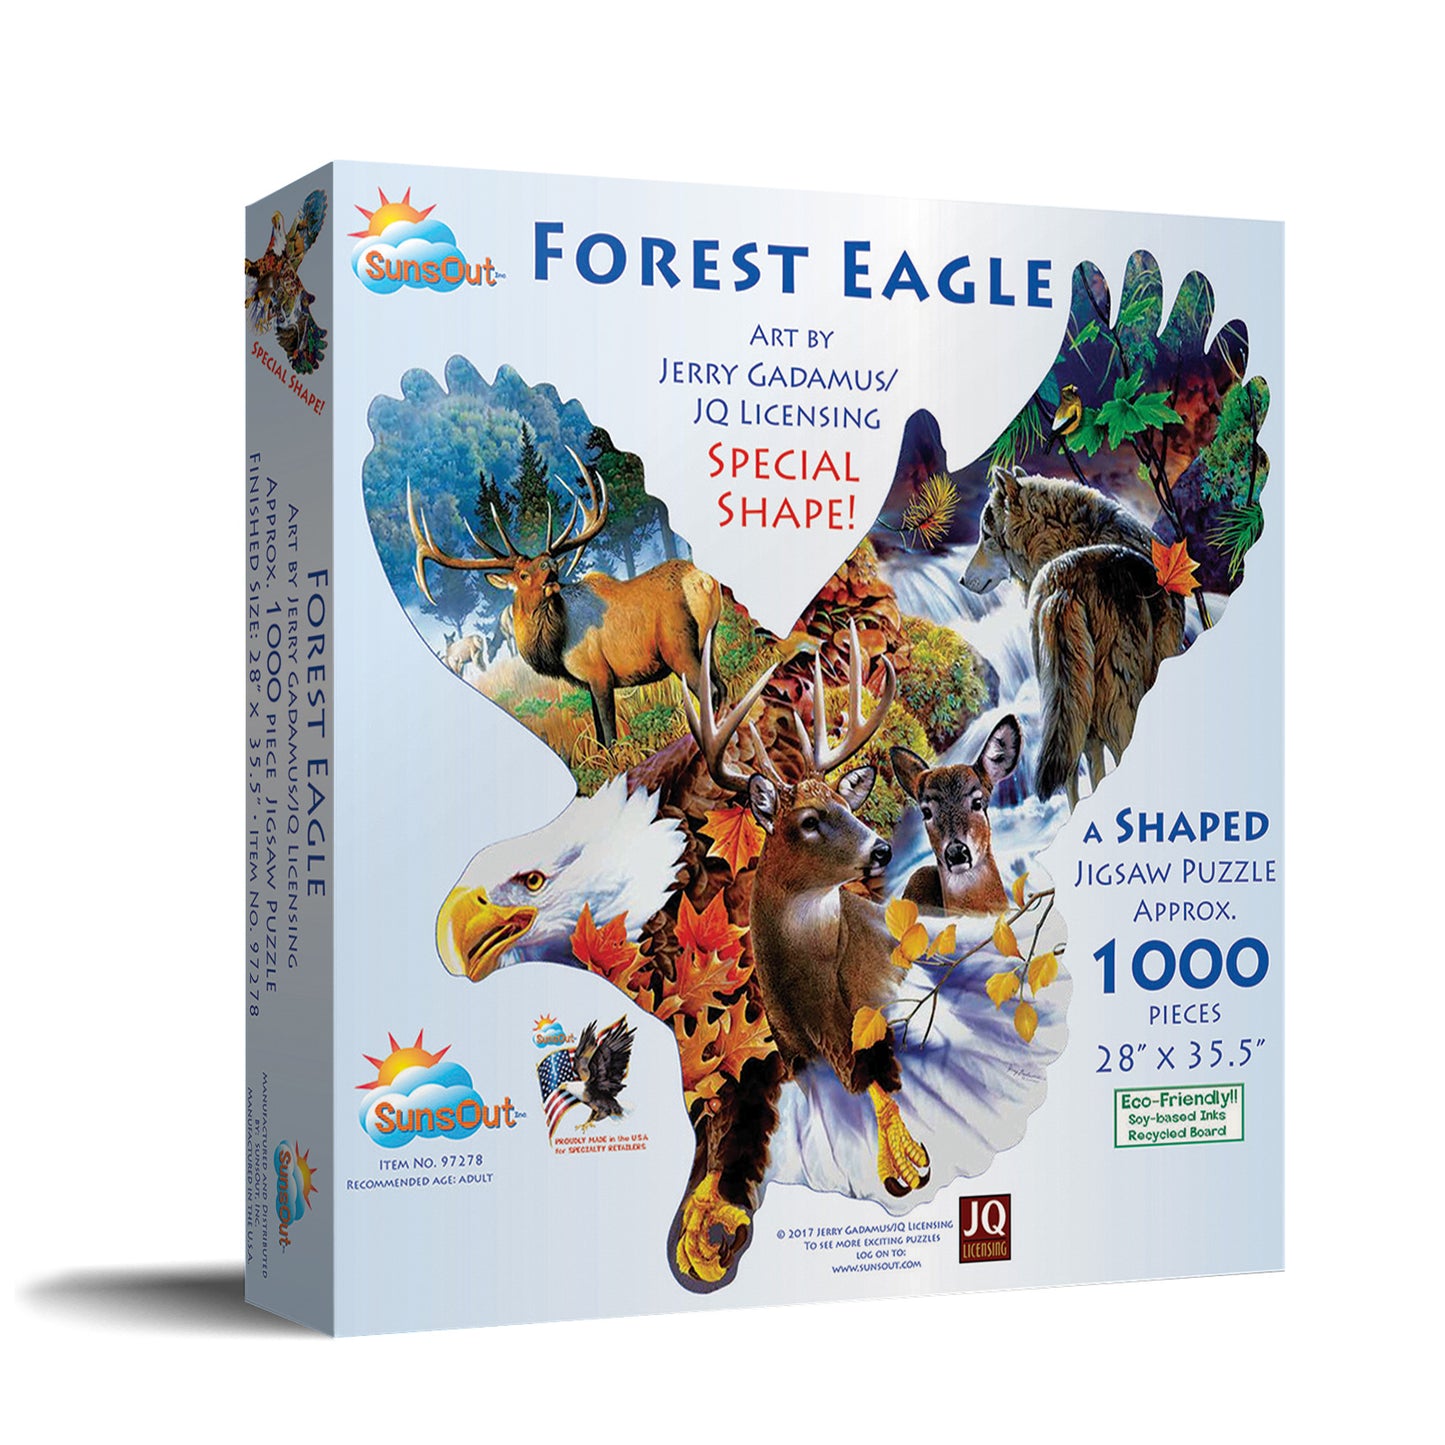 Forest Eagle - Shaped 1000 Piece Jigsaw Puzzle